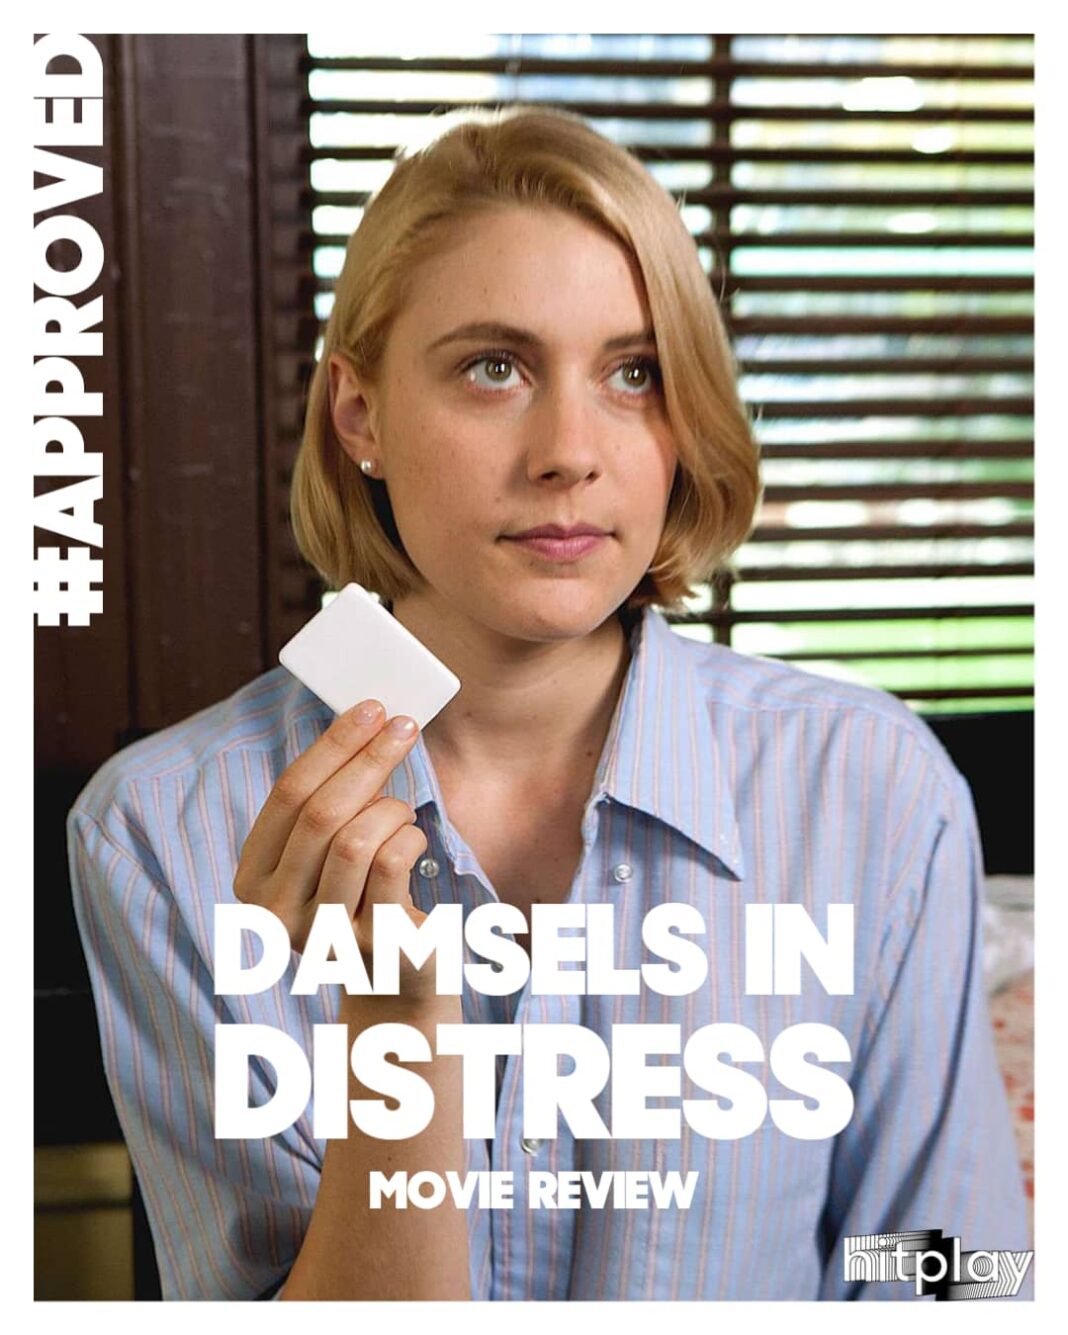 damsels in distress movie review